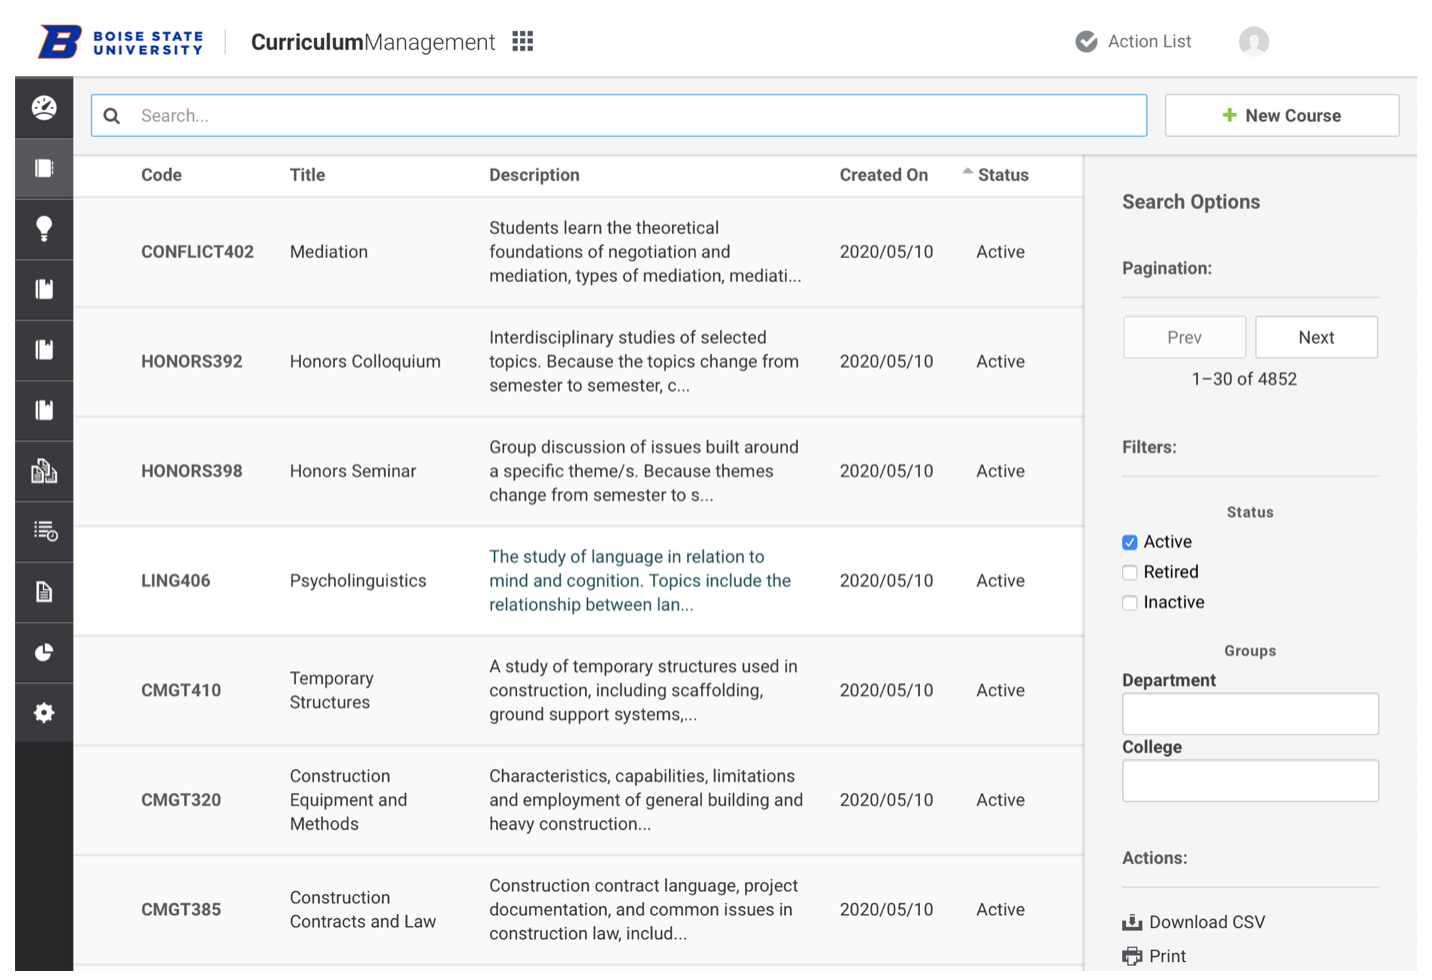 screenshot of curriculum management dashboard showing courses